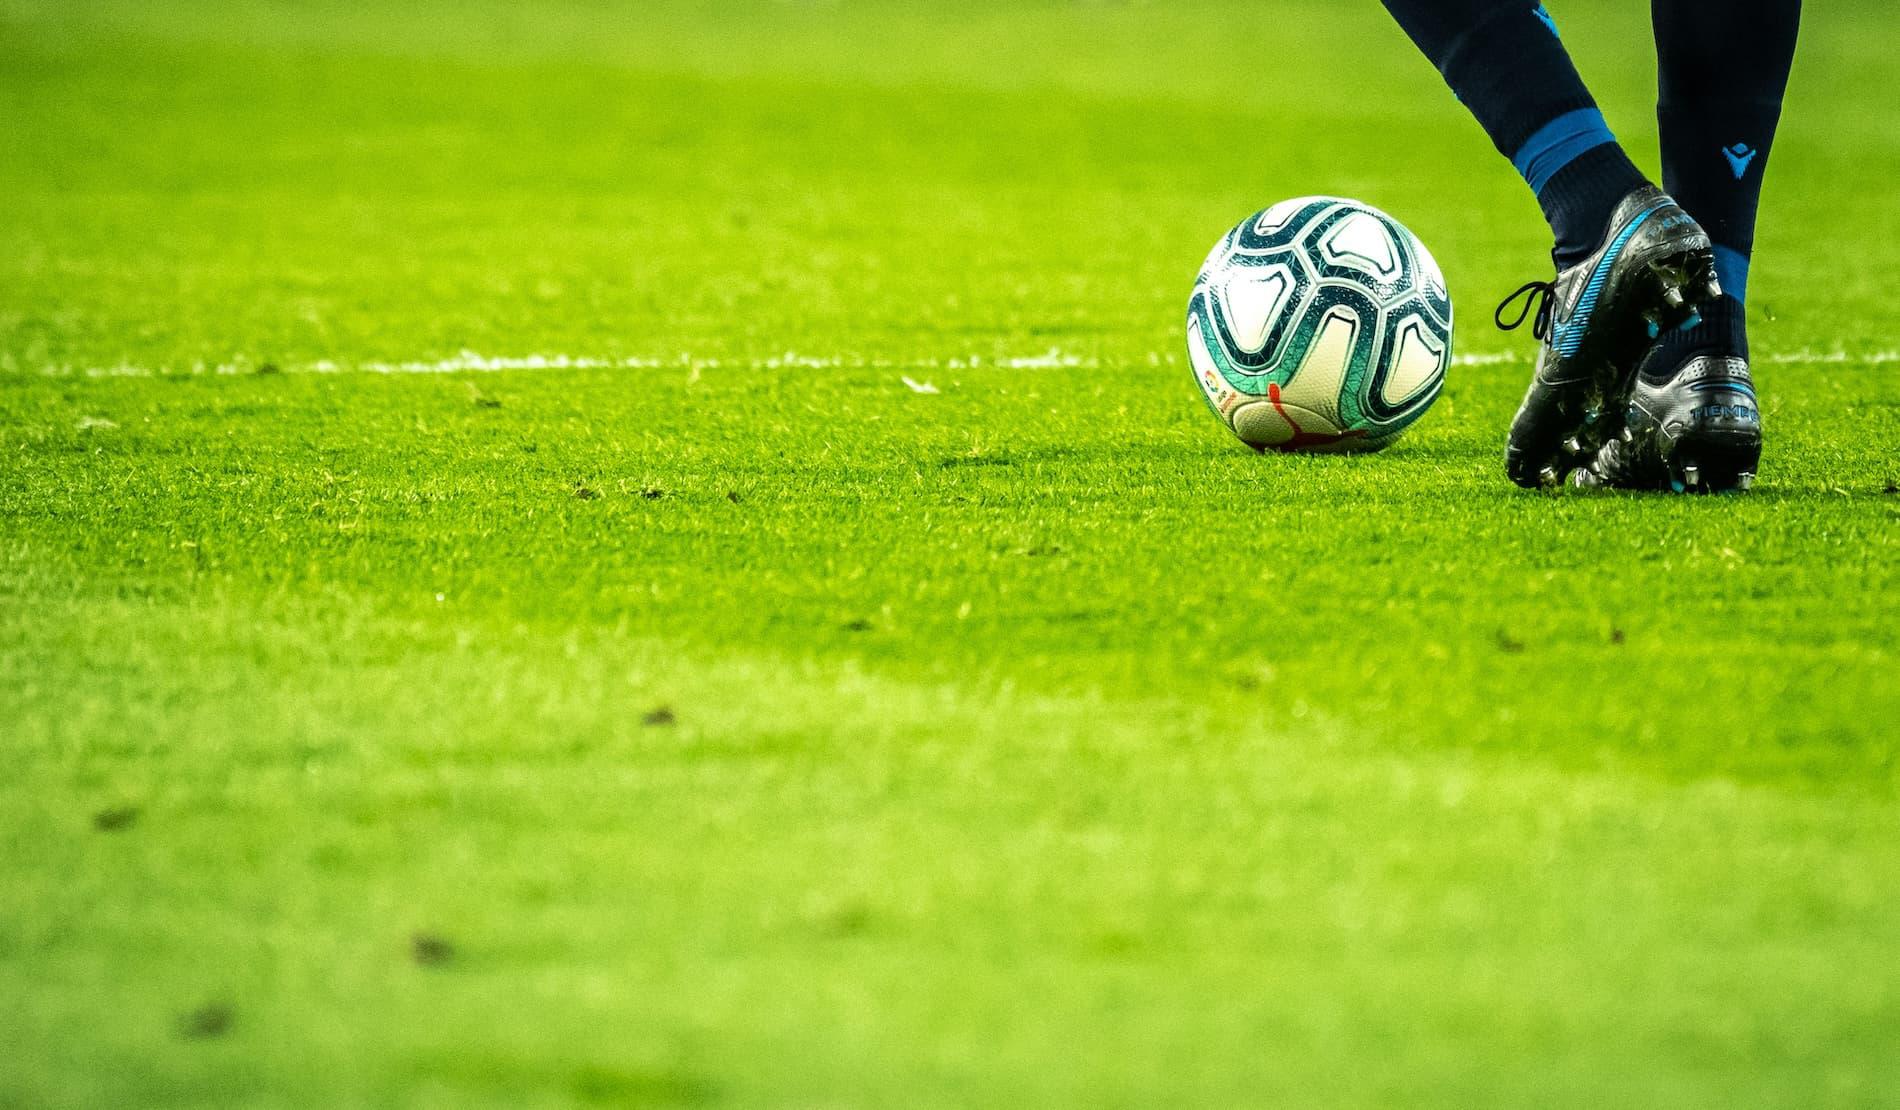 A close up of a football player and ball on the pitch